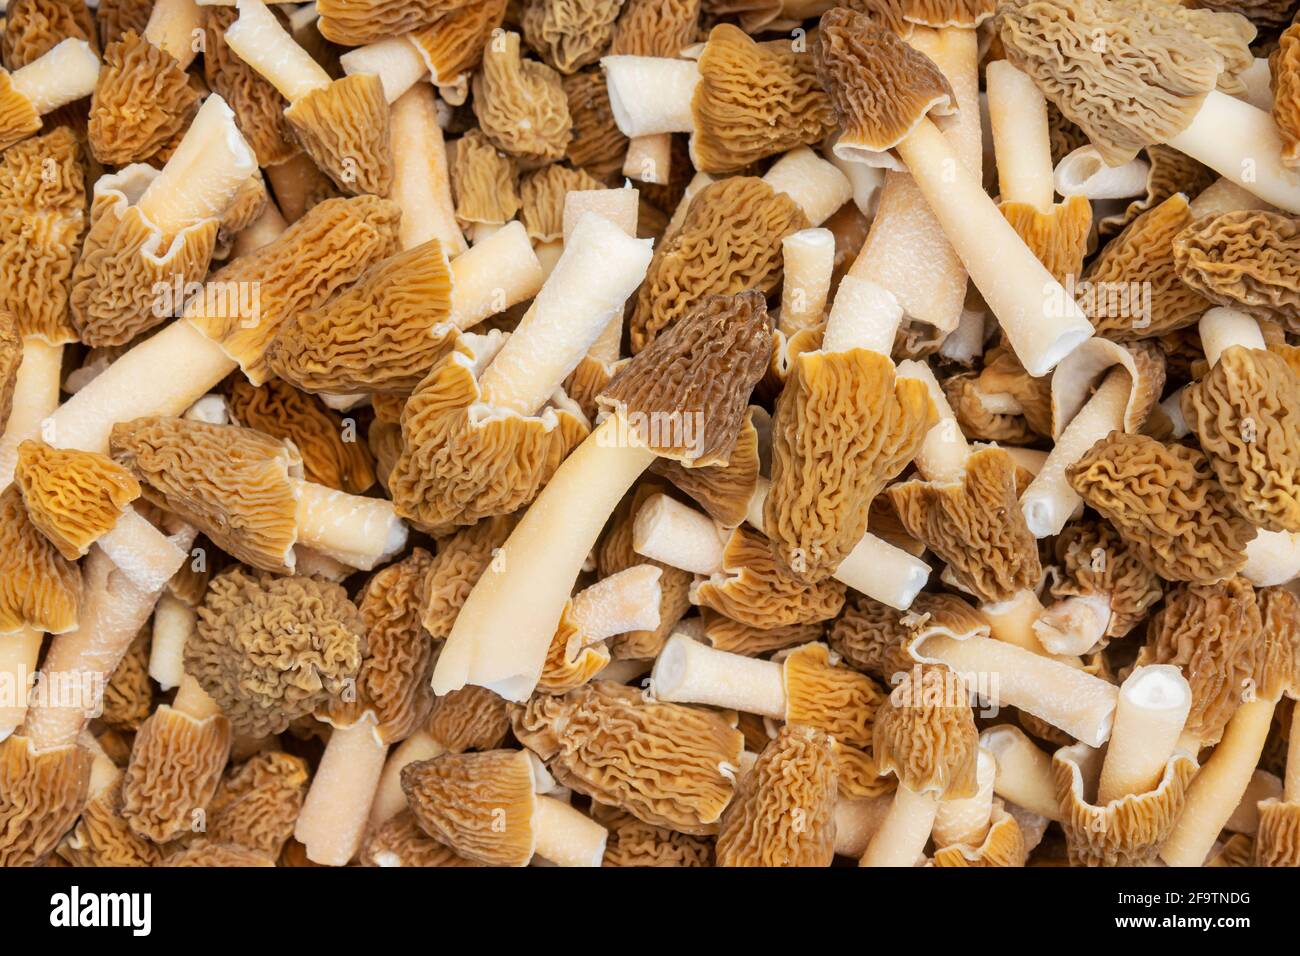 spring morel mushrooms are collected in a basket, texture Stock Photo